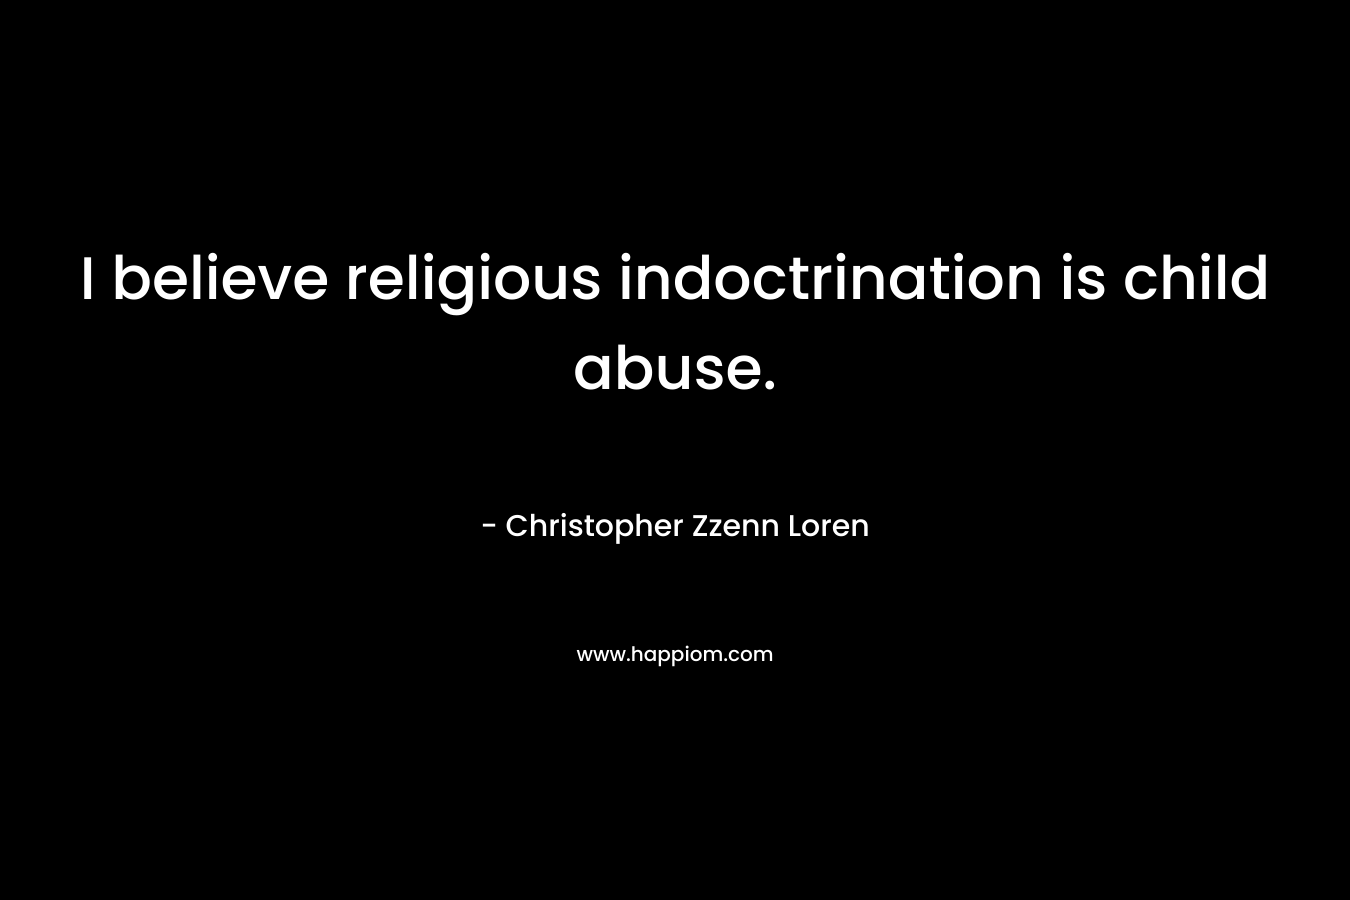 I believe religious indoctrination is child abuse.